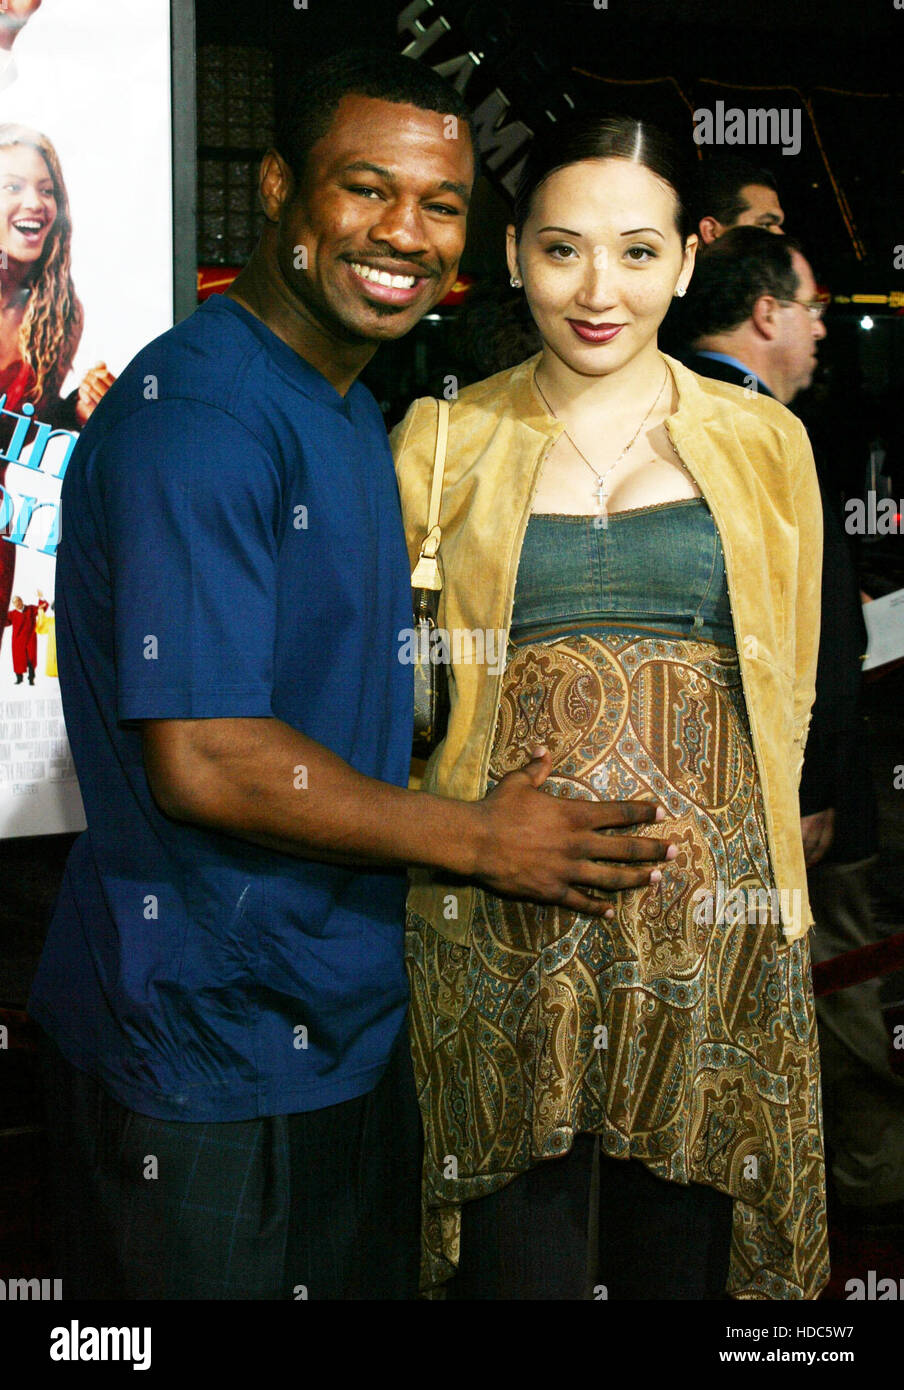 FBS12 20030917 HOLLYWOOD, UNITED STATES :  Boxer Shane Mosely, left, with his pregnant wife, Jin, pose during the movie premiere 'The Fighting Temptations' in Hollywood,  on  Thursday, 17, September 2003. The film was produced by Paramount Pictures and stars Beyonce Knowles and Cuba Gooding, Jr. Photo by Francis Specker Stock Photo